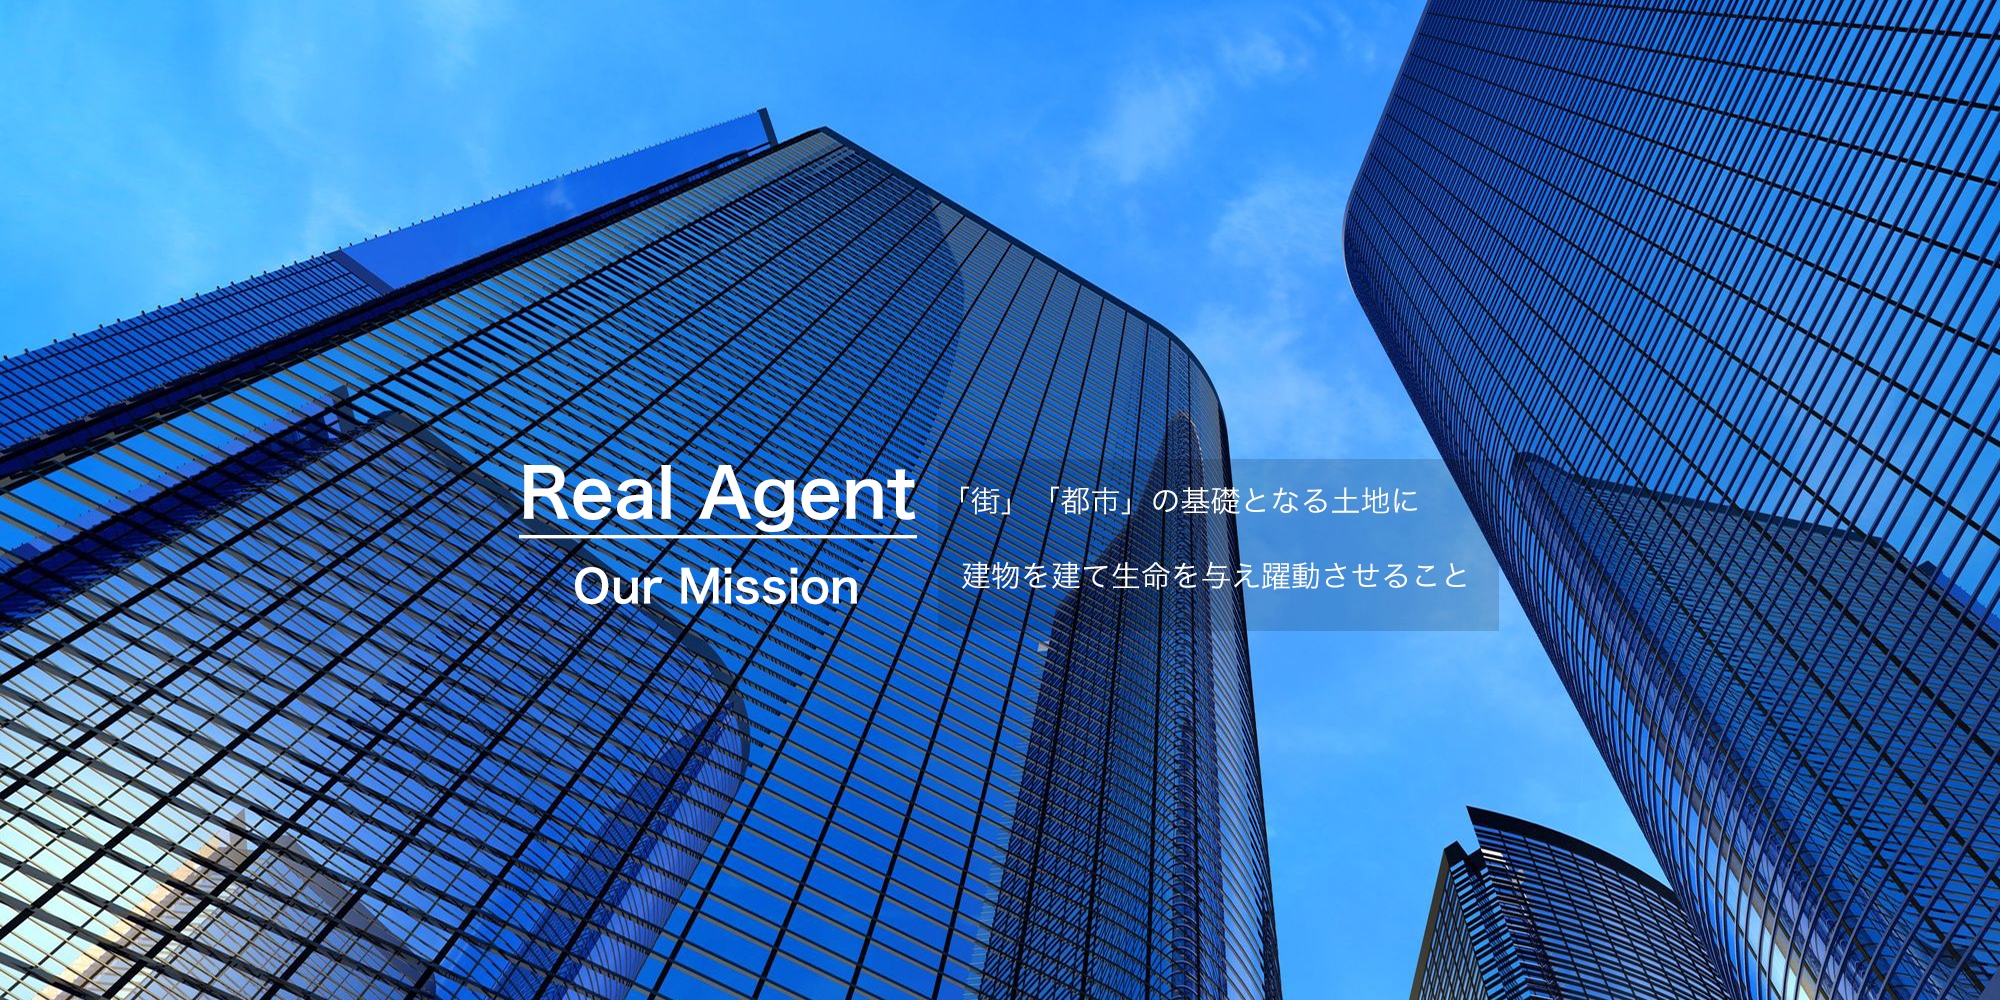 Real Agent Our Mission 「街」「都市」の基礎となる土地に建物を建て生命を与え躍動させること。